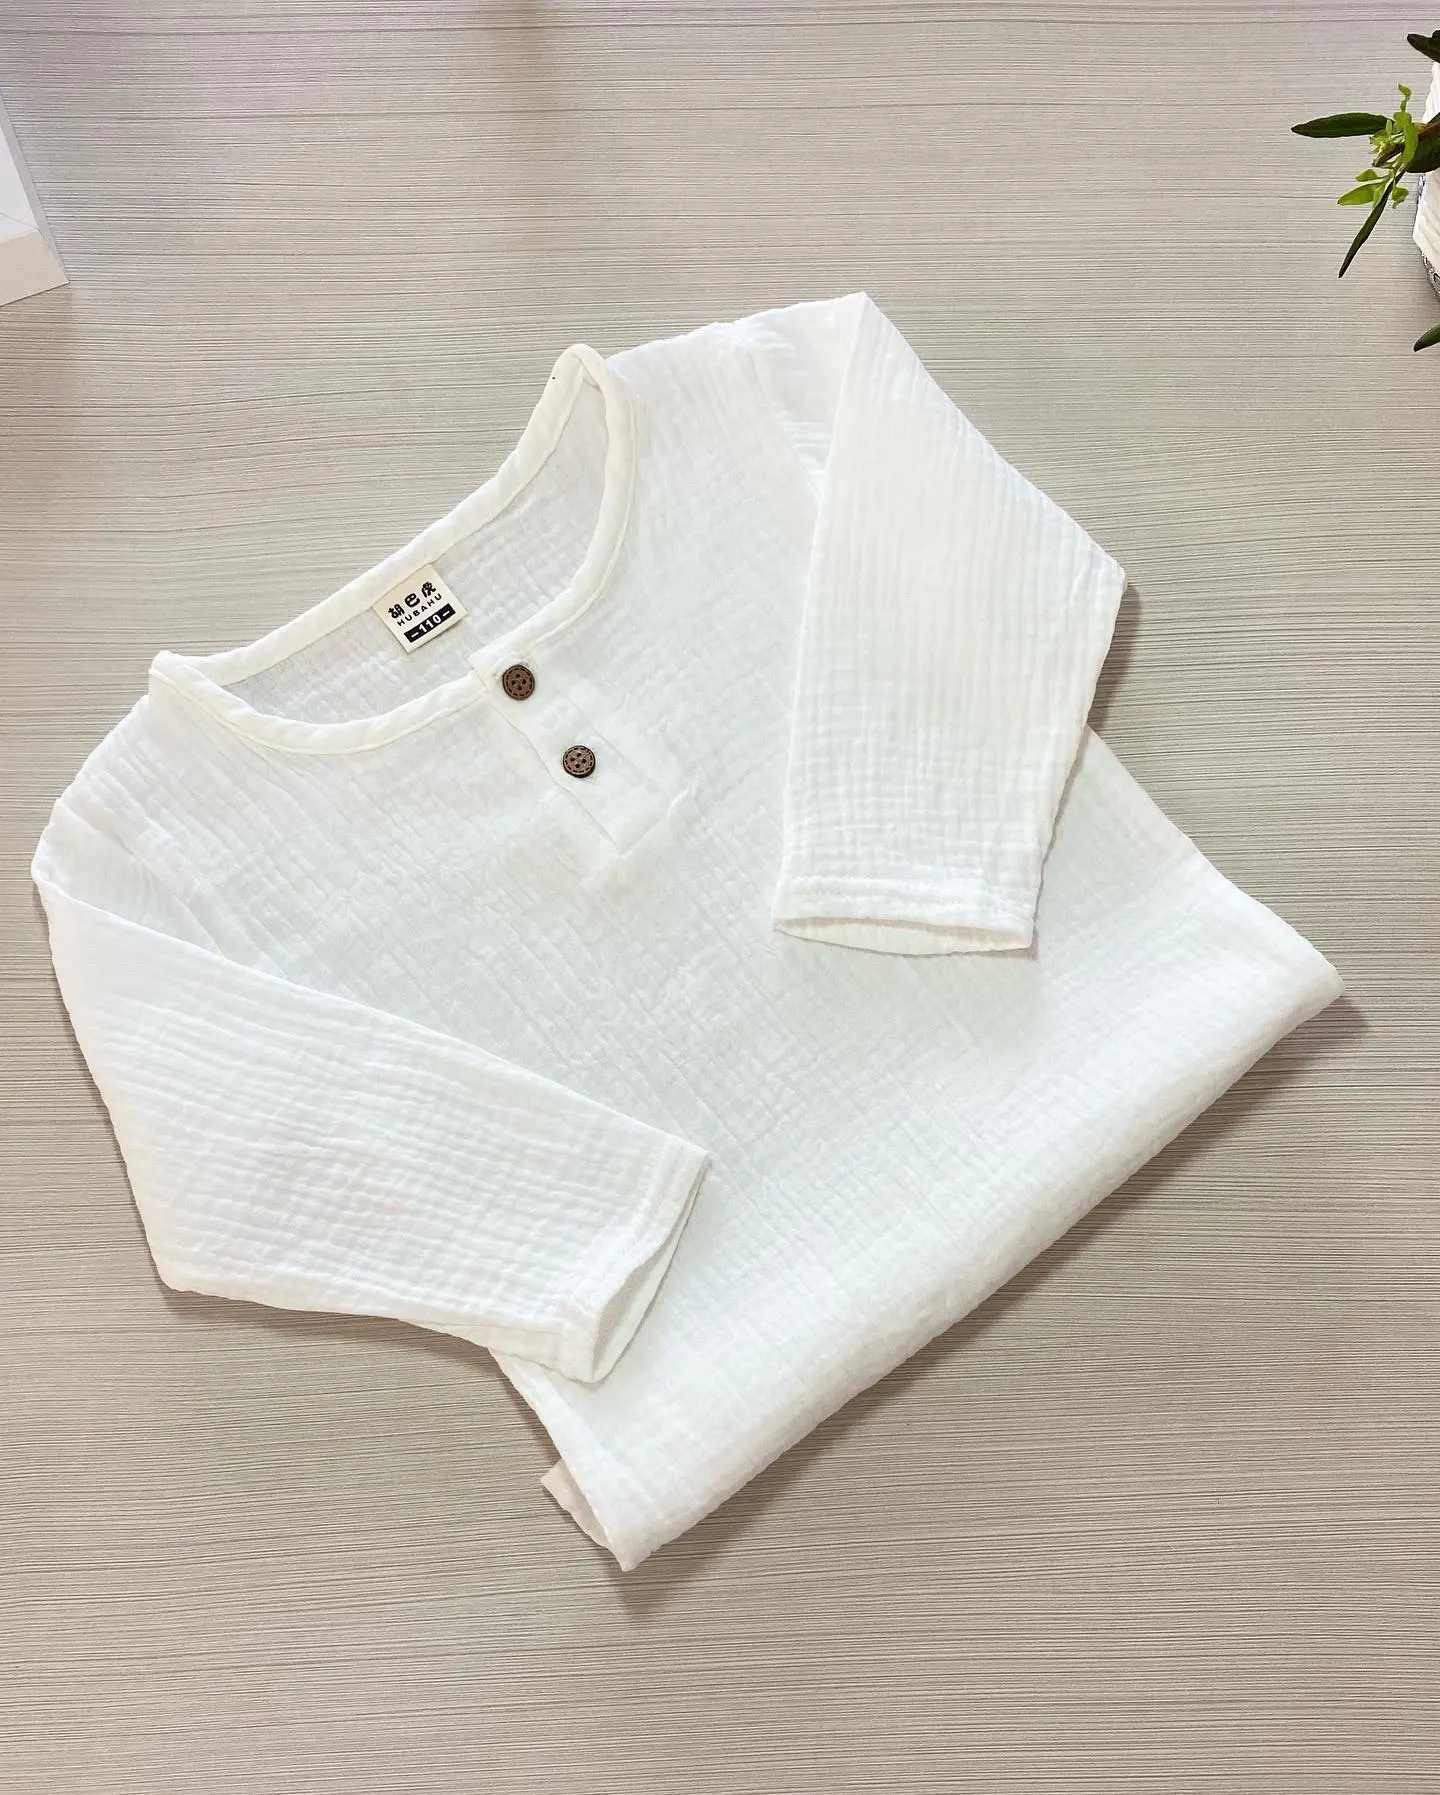 Linen 2021 Cotton Baby Boy Girl Summer T Shirts New Toddler Comfortable Tops Tee Children Clothing Kids Button 80-130CM Height photo review